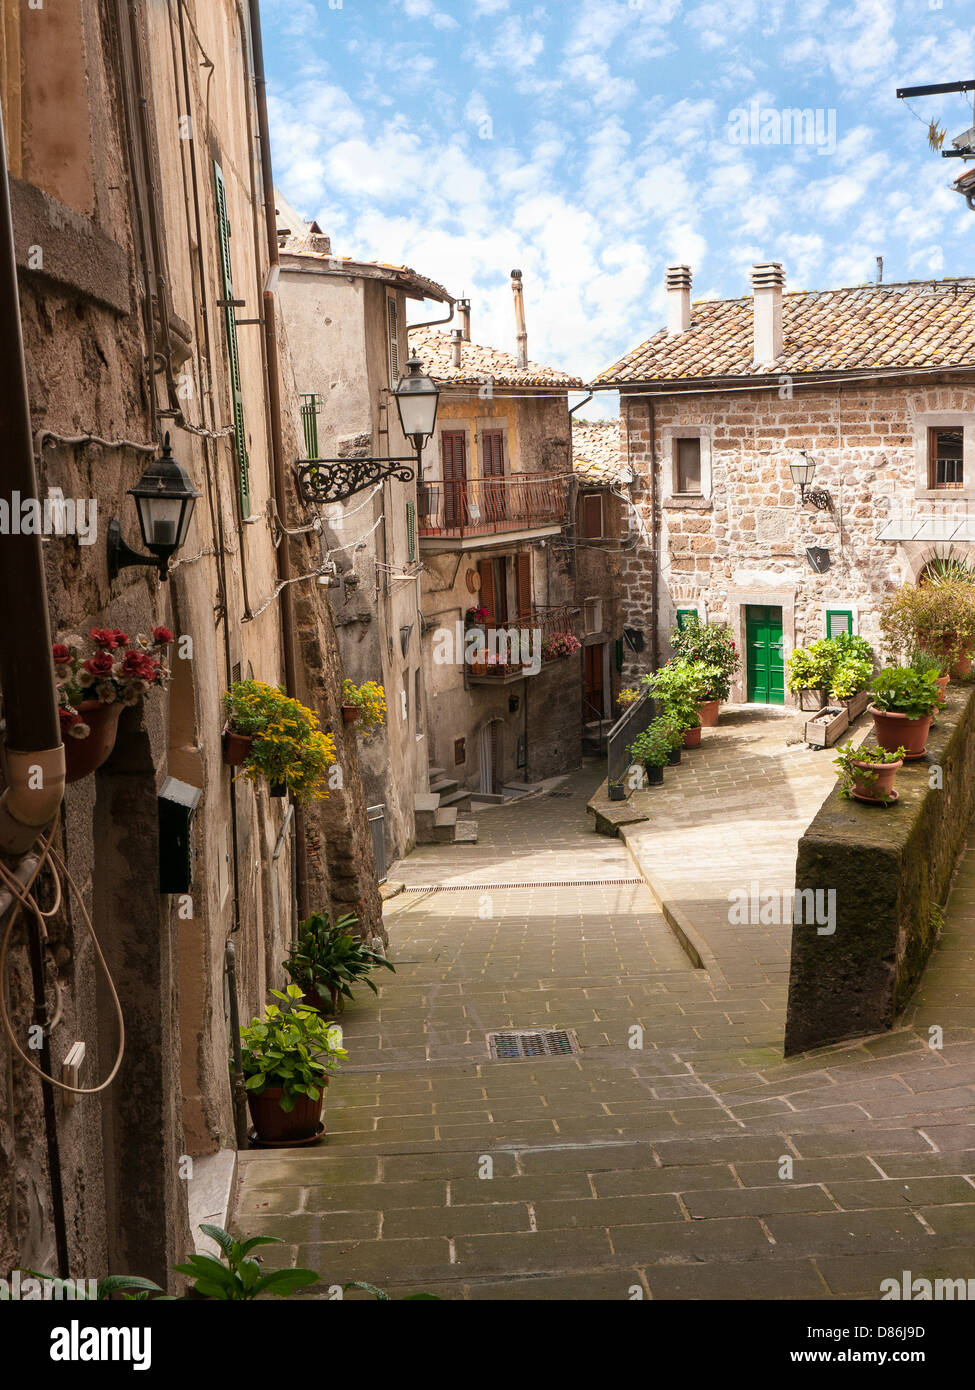 A street in the medieval hill top town of Soriano nel Cimino, Umbria, Italy Stock Photo